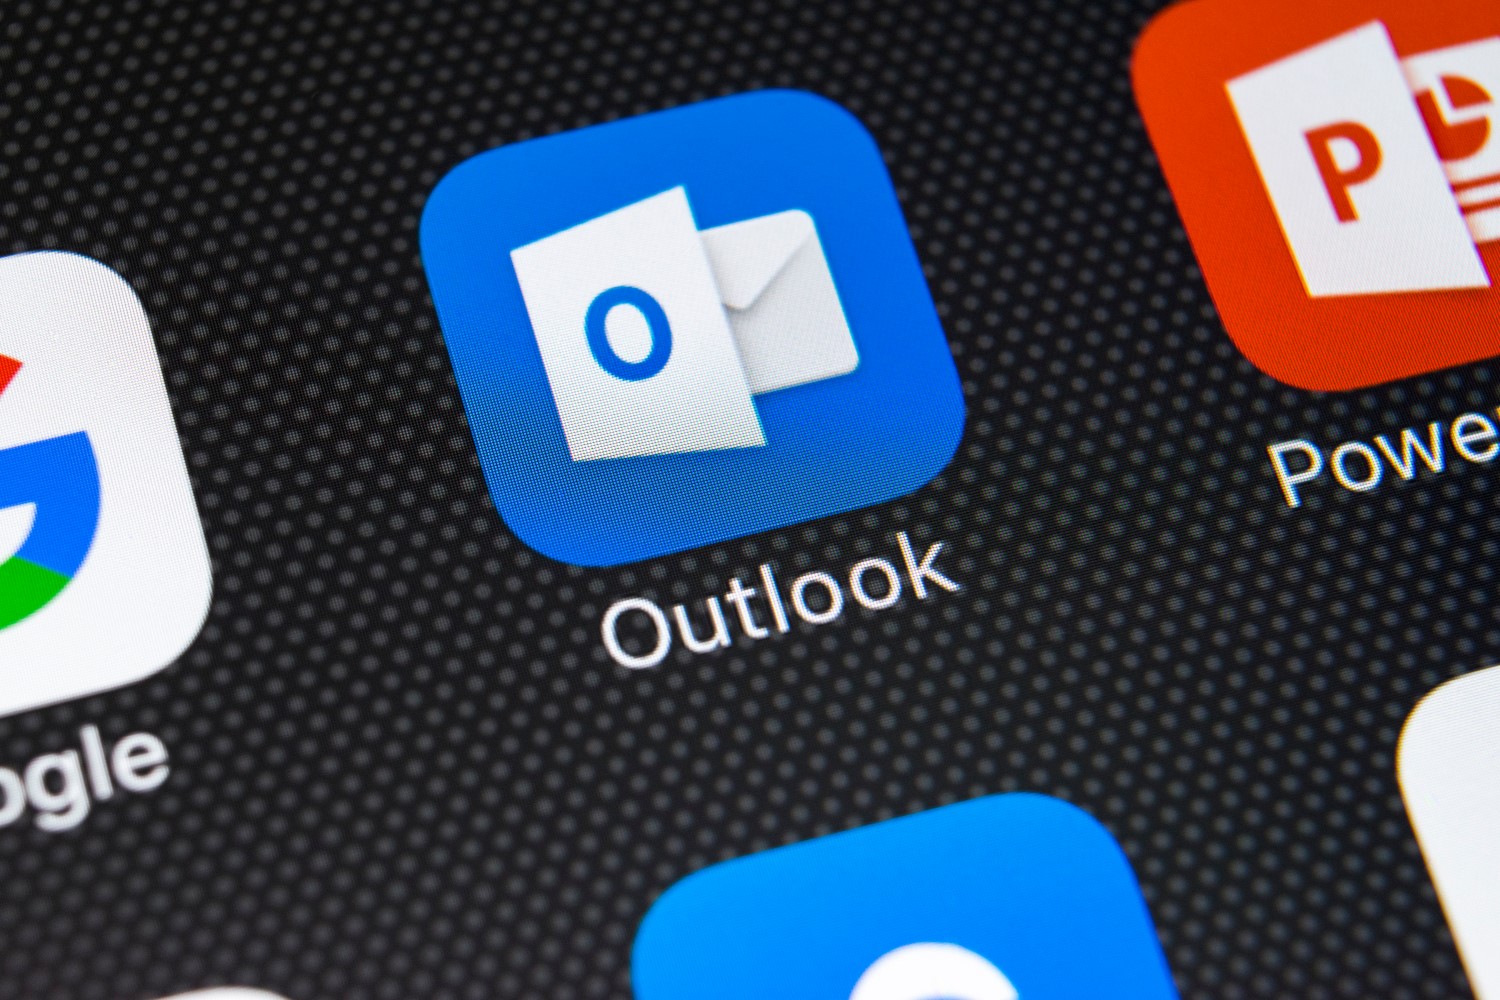 Microsoft Outlook Hackers Stole Crypto Using Victims’ Emails: Report